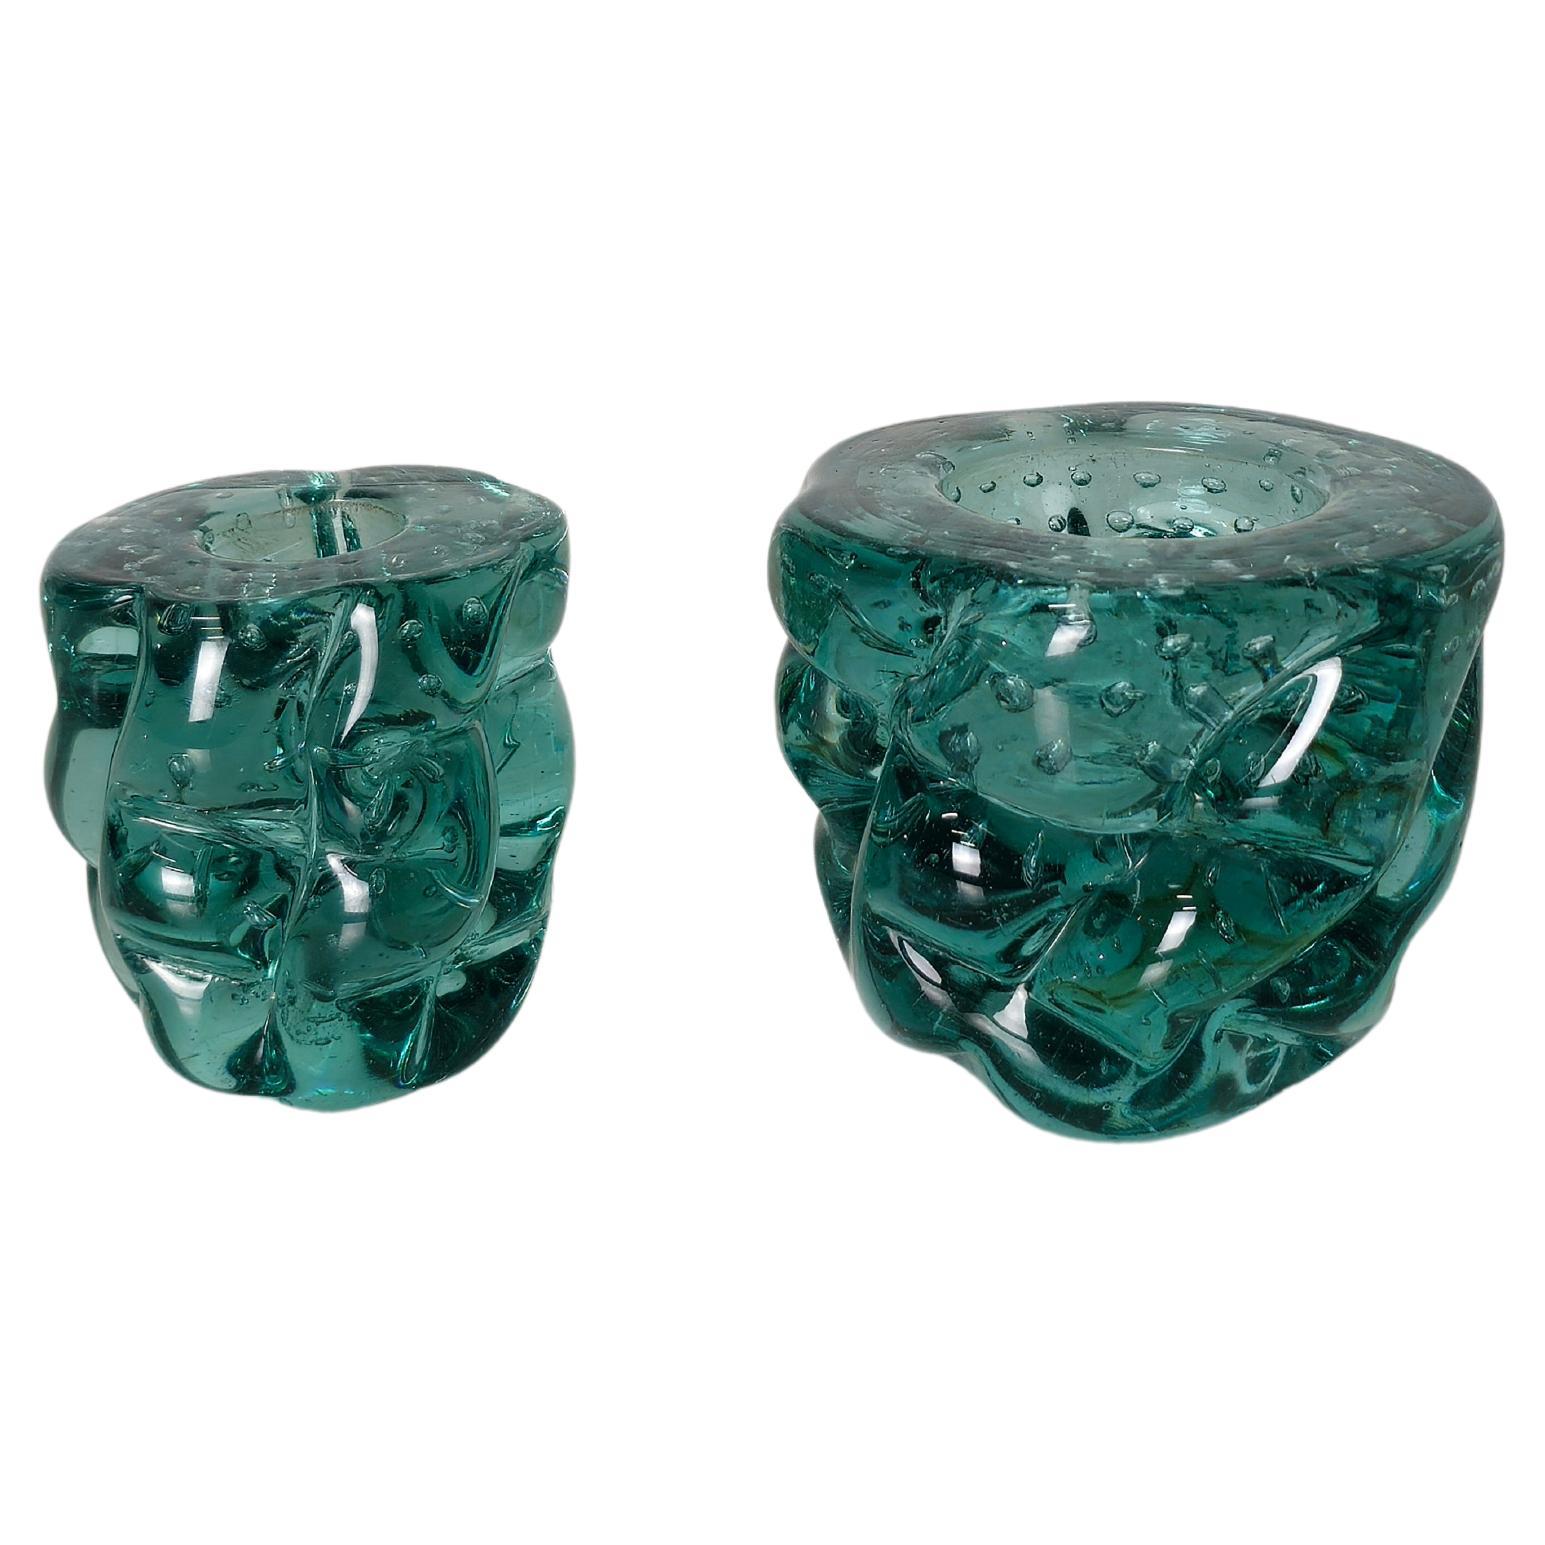 Set of 2 decorative objects/small vases made of bullicante Murano glass in shades of aqua green. Produced in the 1960s by the renowned Murano company Seguso.



Note: We try to offer our customers an excellent service even in shipments all over the